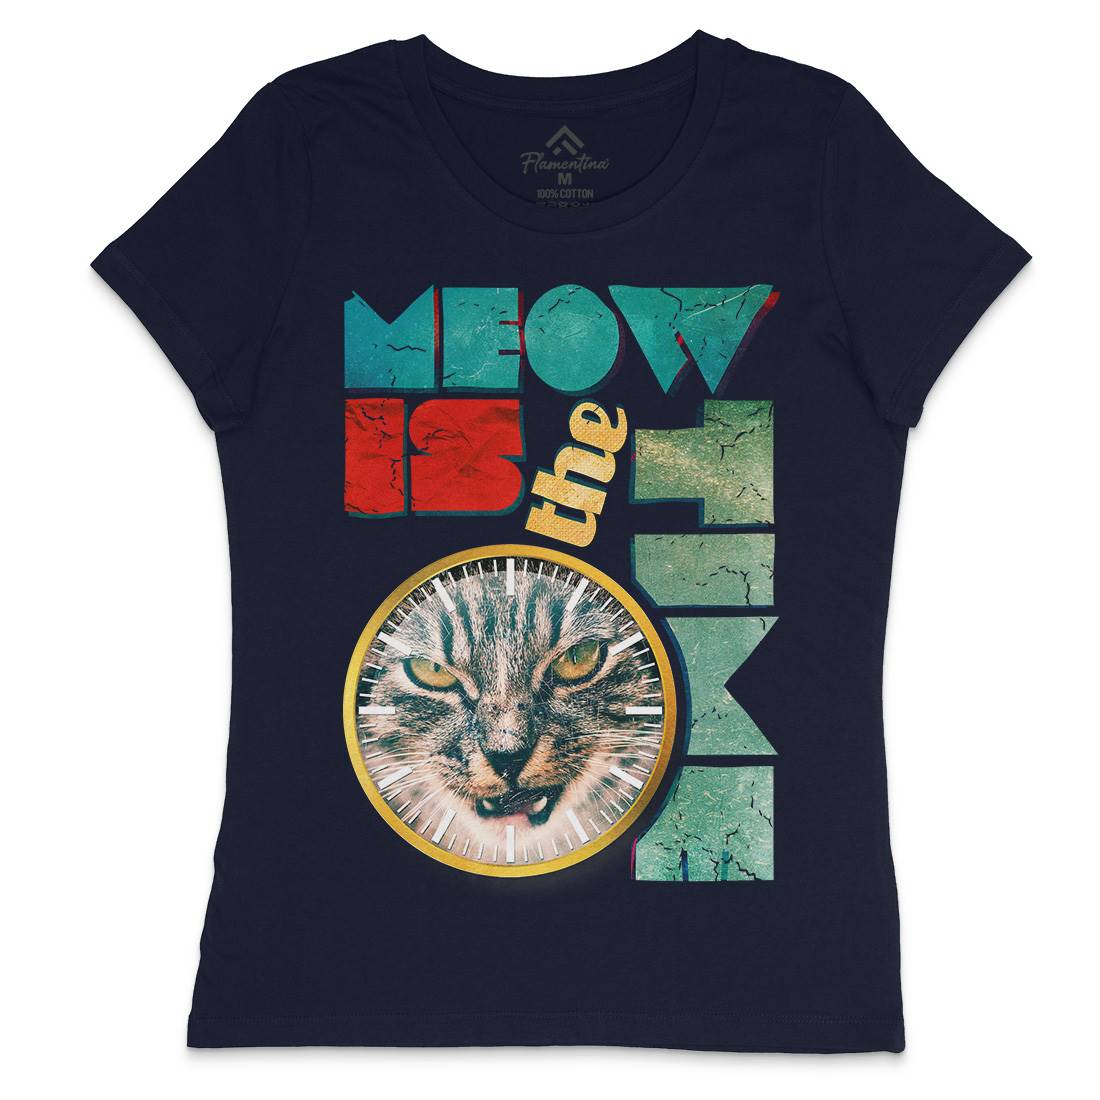 Meow Is The Time Womens Crew Neck T-Shirt Animals A876